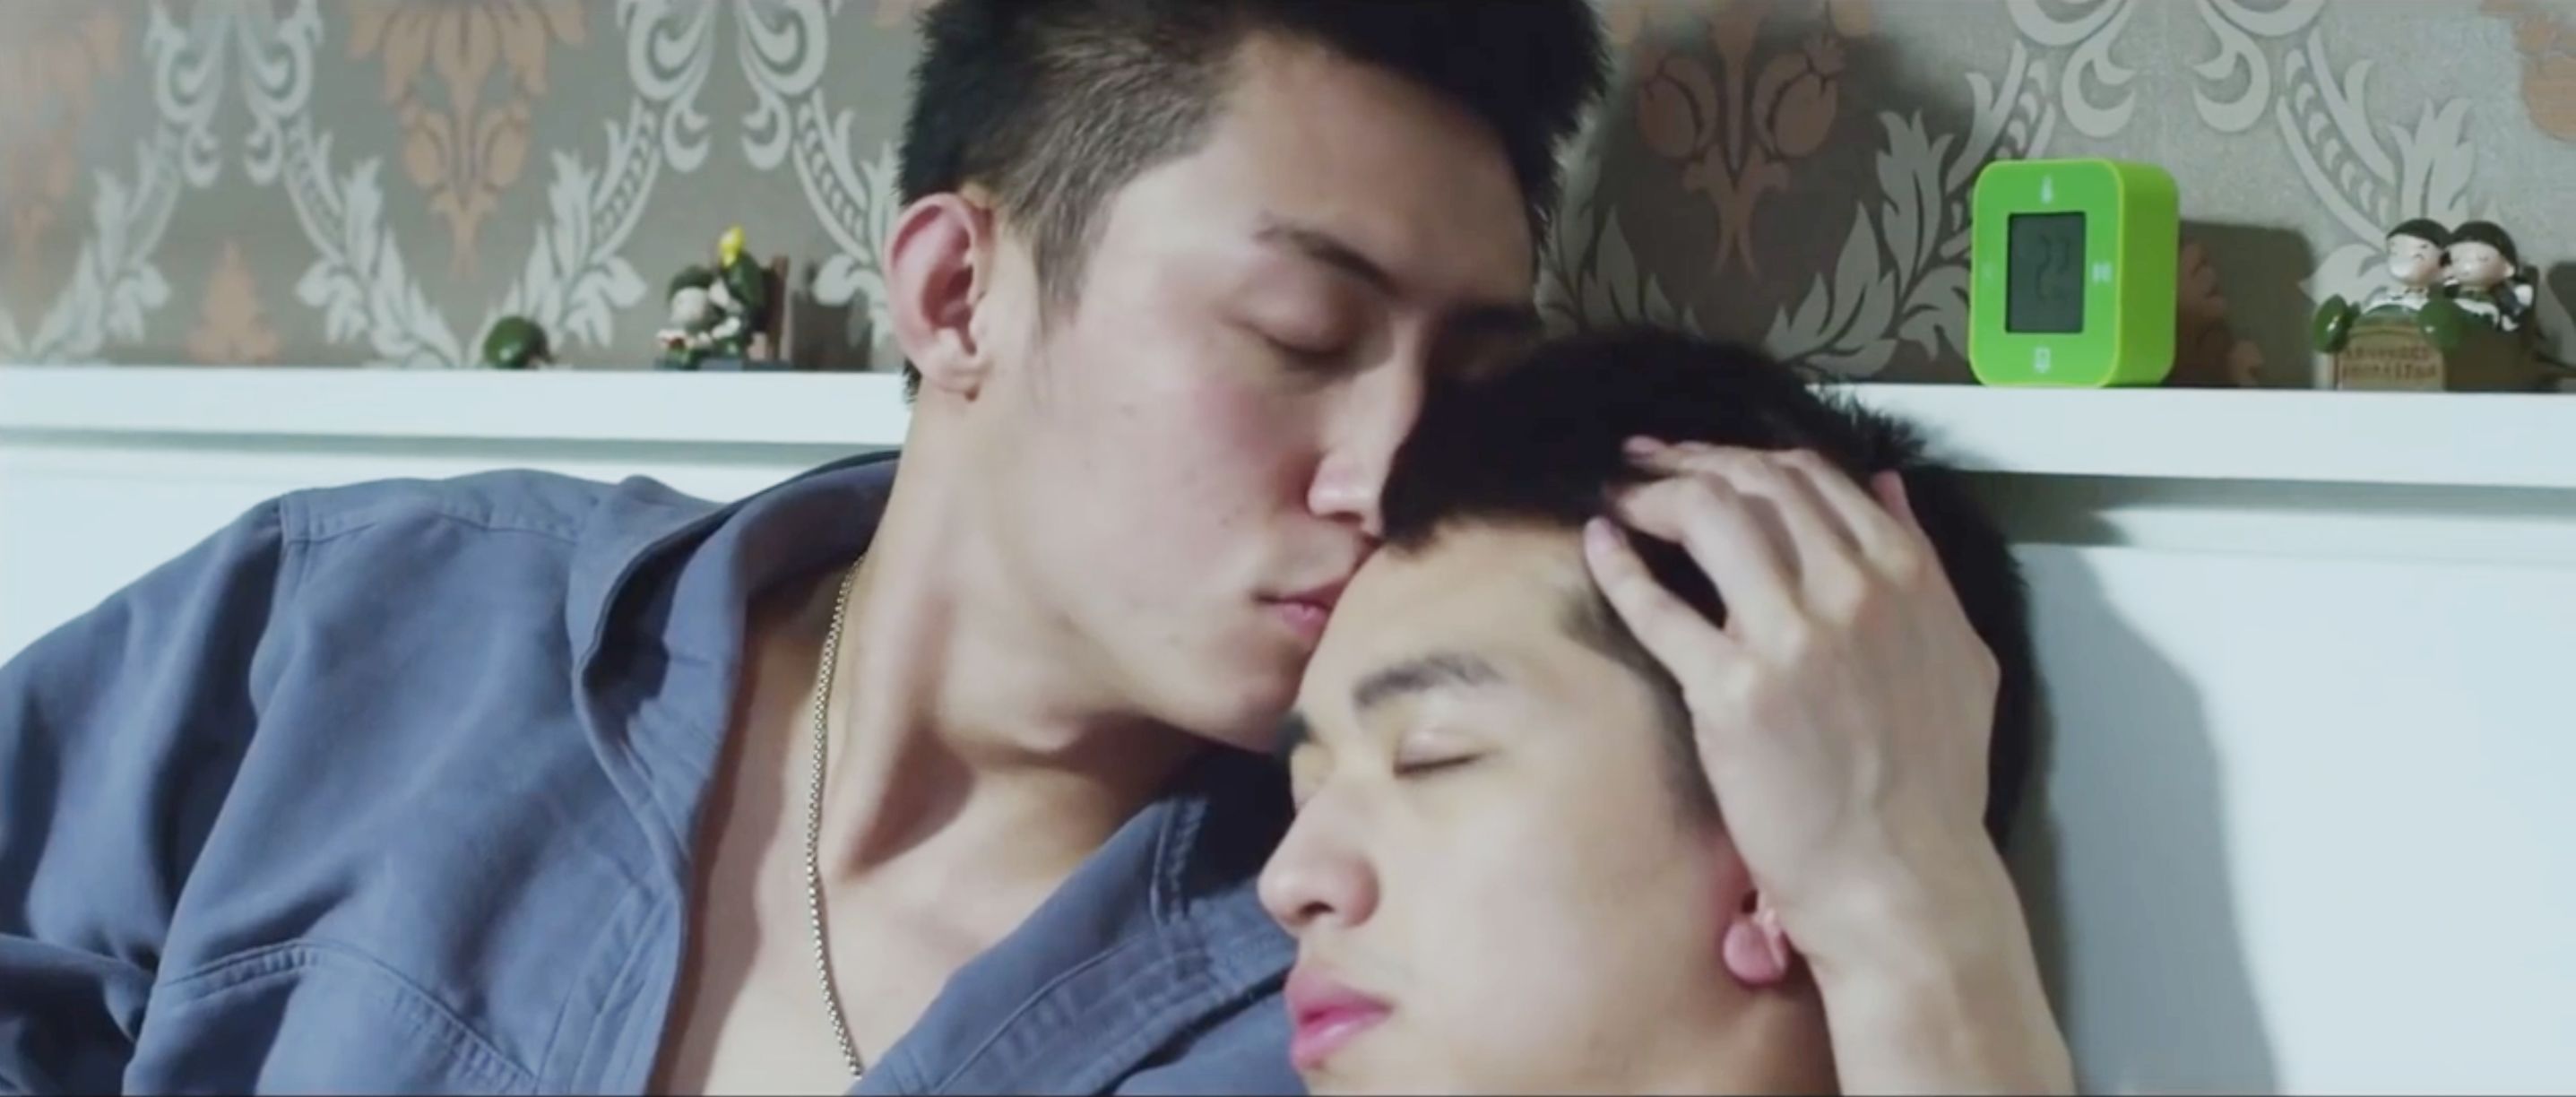 Forced Gay Sex - China bans same-sex romance from TV screens | CNN